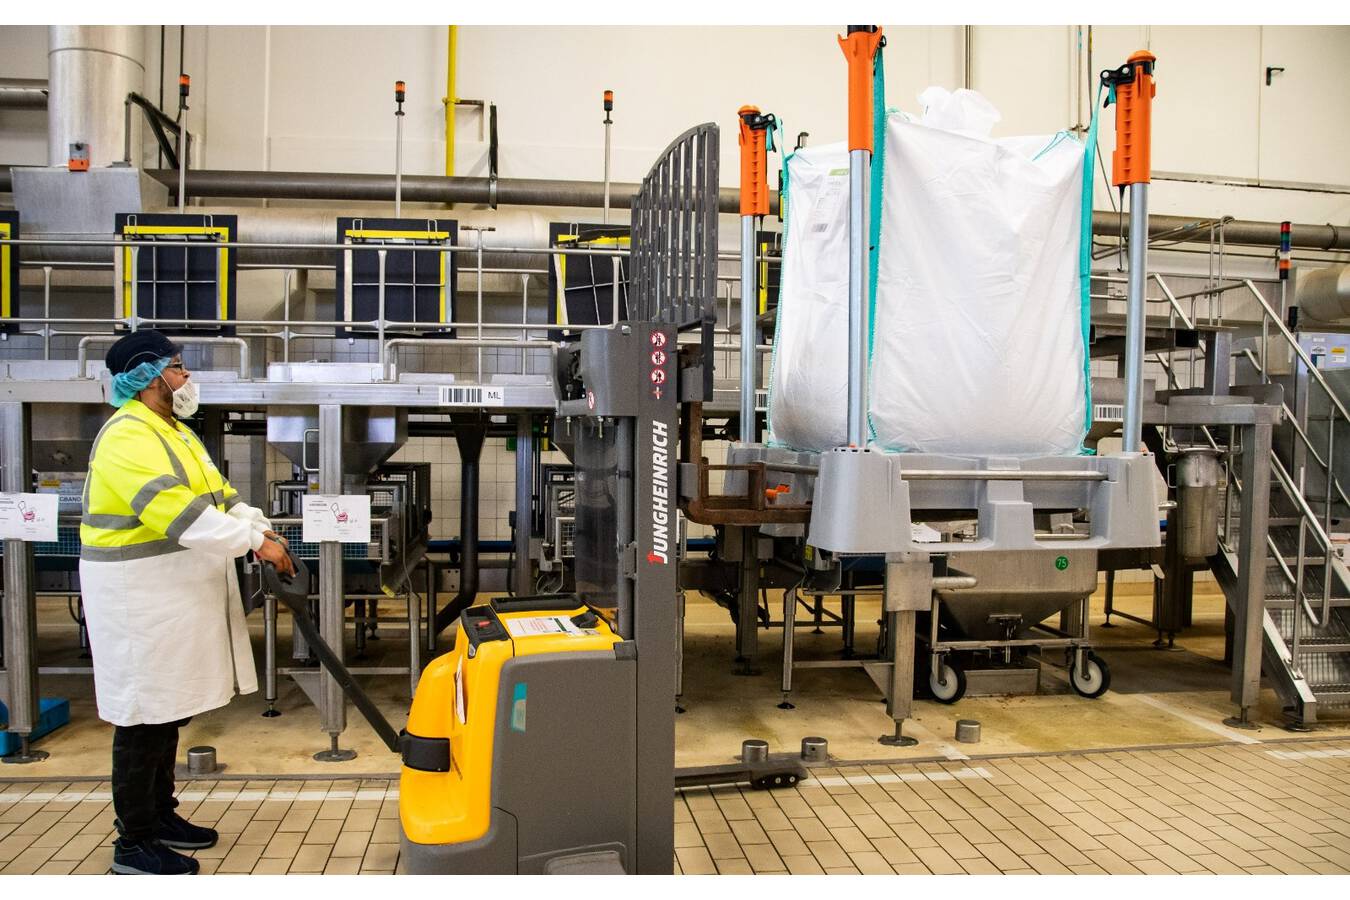 Neva system keeps production lines and products clean The innovative Neva big bag handling system at Duyvis (PepsiCo) means efficient work preparation, saving space, increased food safety and a clean product line.